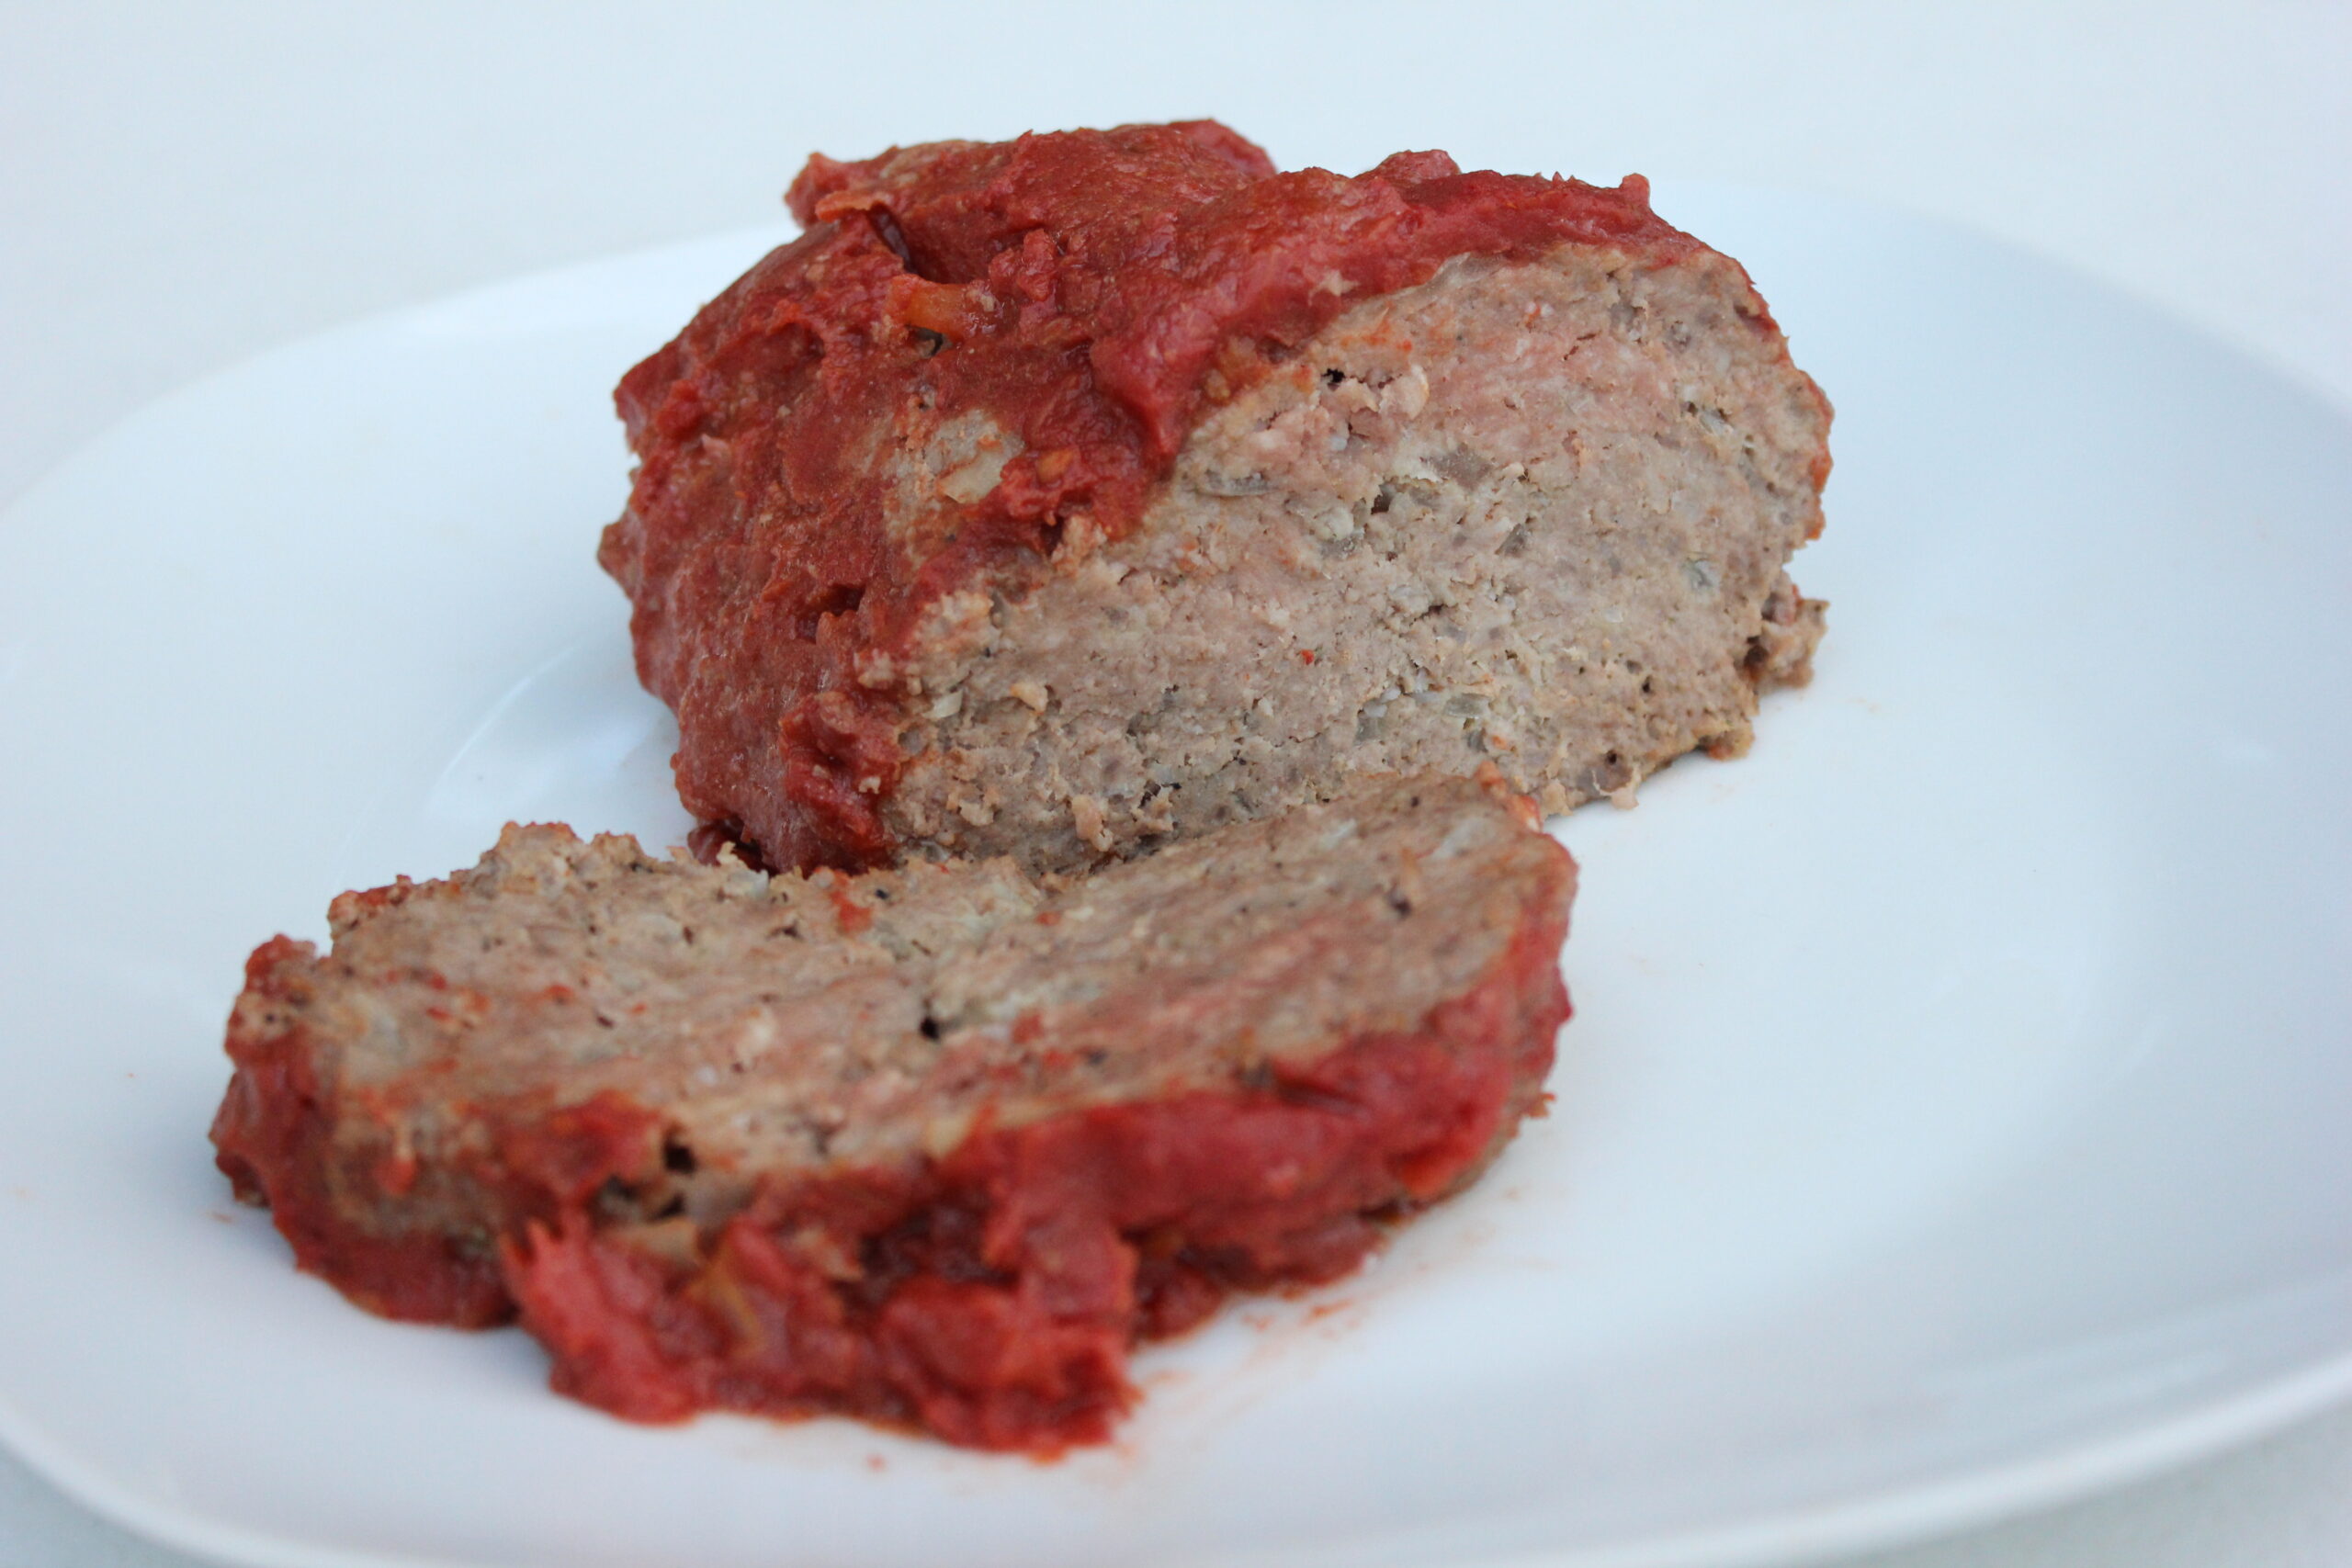 What Are Tips To Cook 3 Lb Meatloaf At 350?